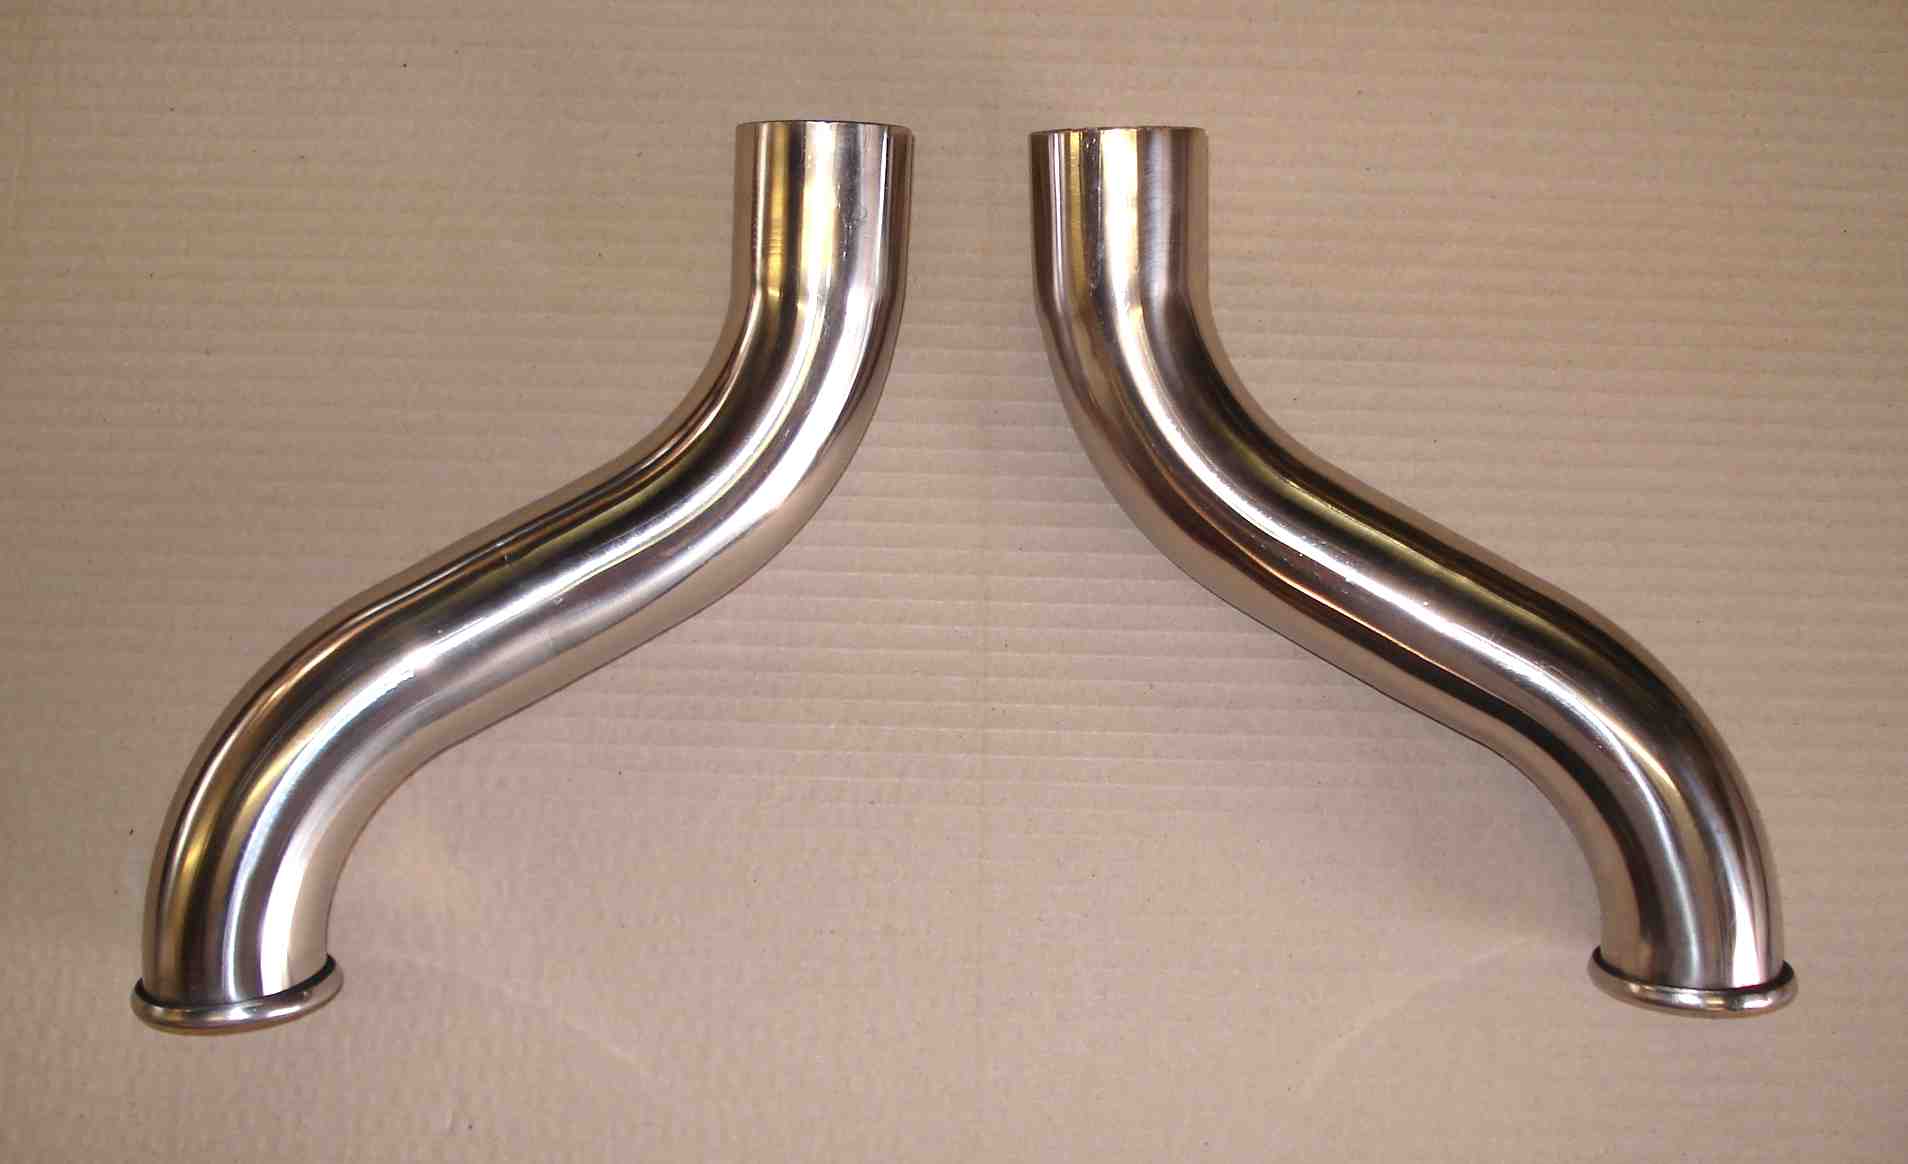 Large bore XJ6/12 tail pipes